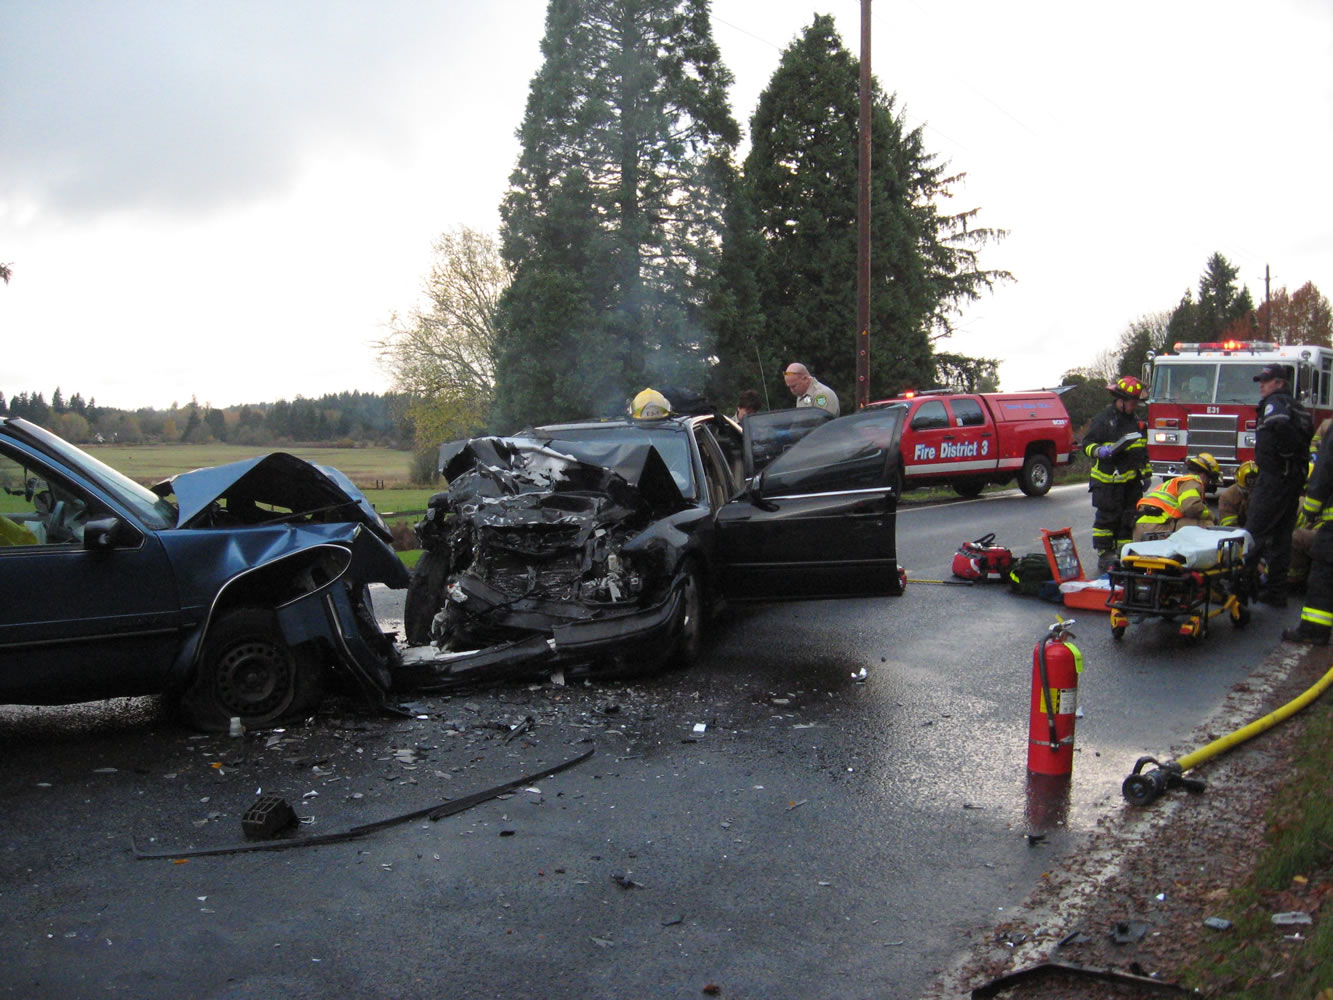 A head-on crash Saturday morning on Northeast 182nd Avenue near 139th Street in Hockinson killed a 52-year-old woman and seriously injured a 22-year-old woman.